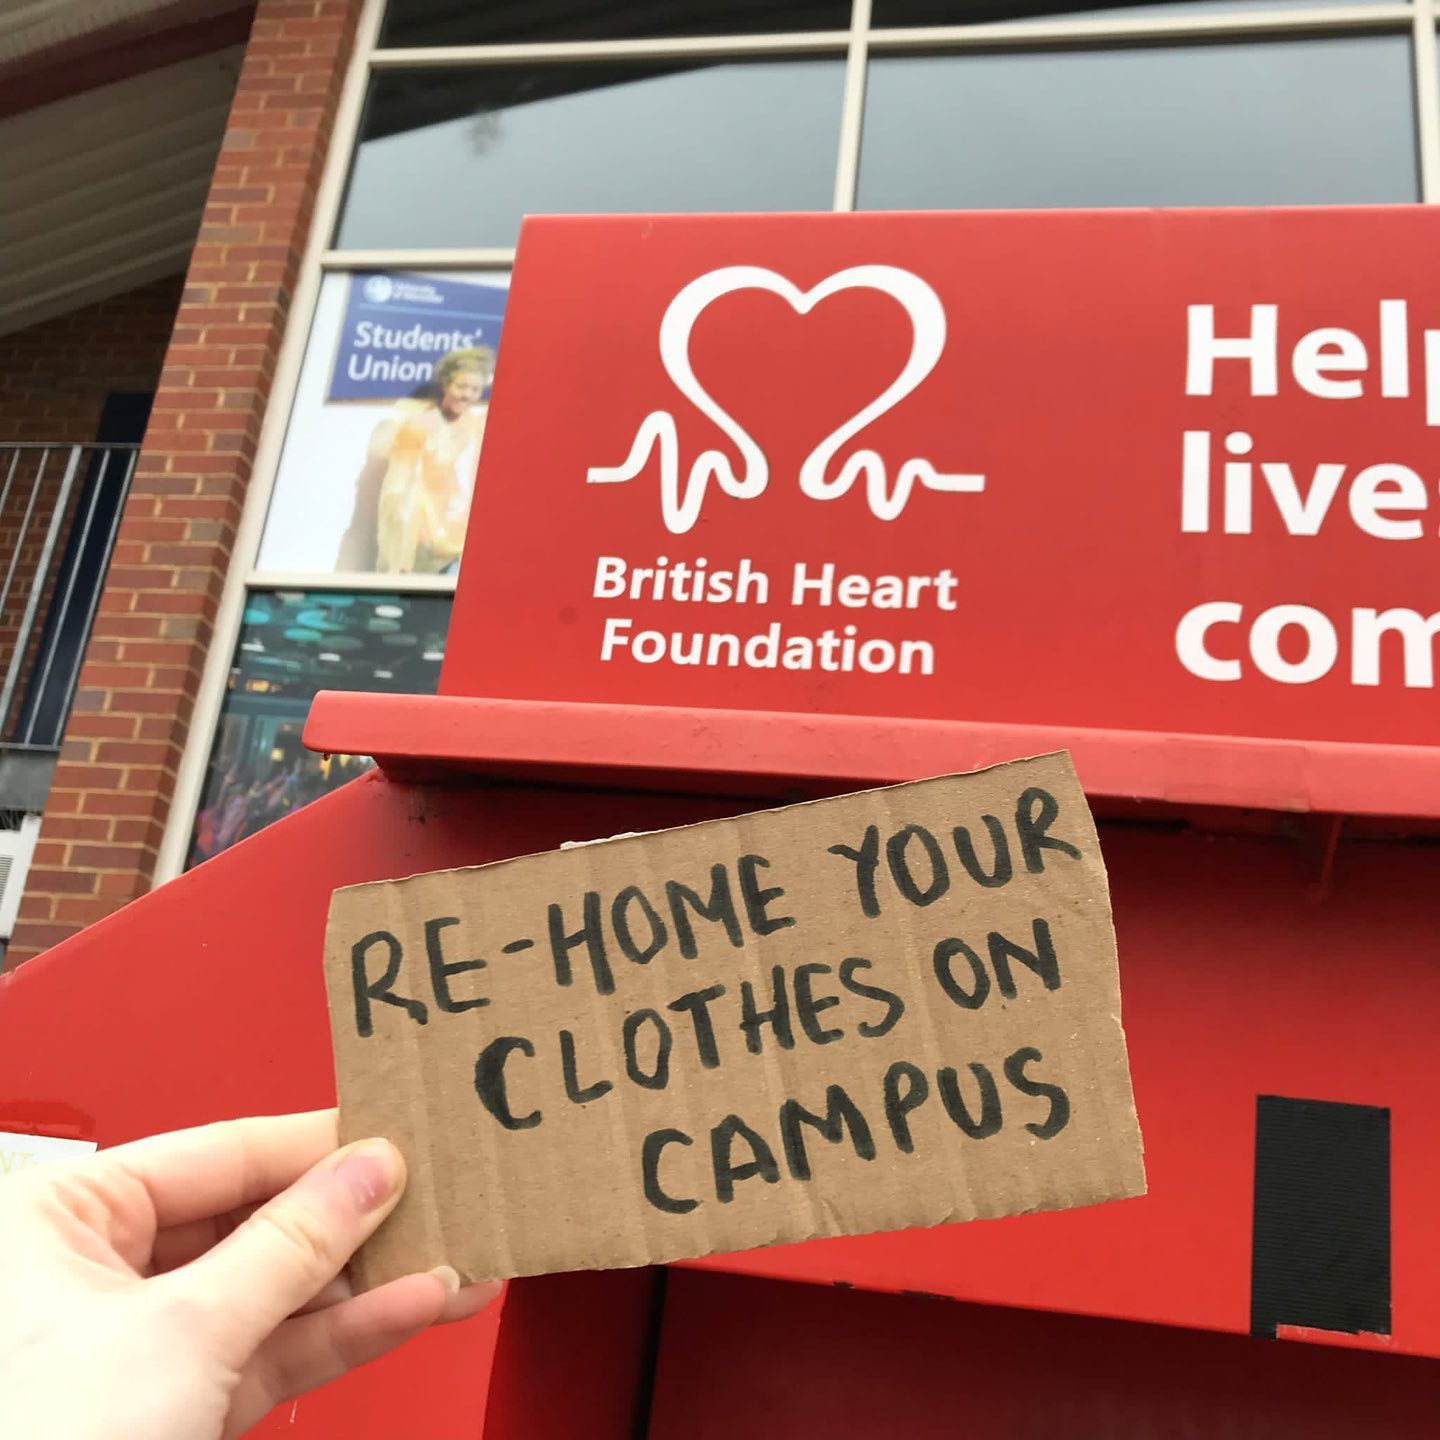 ❤️FINAL GIVEAWAY ❤️

Giving your clothes a second lease on life is a great way to get rid of your unwanted clothes, and also help the environment! 

📲 Follow the link in our bio, and go to the ‘Campus’ tab, to read our post on re-homing your clothes on campus! 

We want to give you PRIZES to help make this change happen! All you have to do is follow the steps below for a chance to WIN! 🏆

PRIZE= Jamie Oliver Vegetarian cookbook

Here’s how to enter:
- Like this post 
- Follow this account @uw_sustain 
- Comment 1 emoji 
👍🏼

You will automatically be entered into our prize draw. Unlimited entries, follow the above steps again. Each time is a new entry. 

Entries close midday on Wednesday 5th January 

#UniversityofWorcester #sustainable #sustainablefashion #sustainability #catcc #fastfashion #textilewaste #clothingcrisis #susthingsout #sustainablelifestyle #ethicalfashion #ecofriendly #ecofashion #secondhandfashion #ecouow